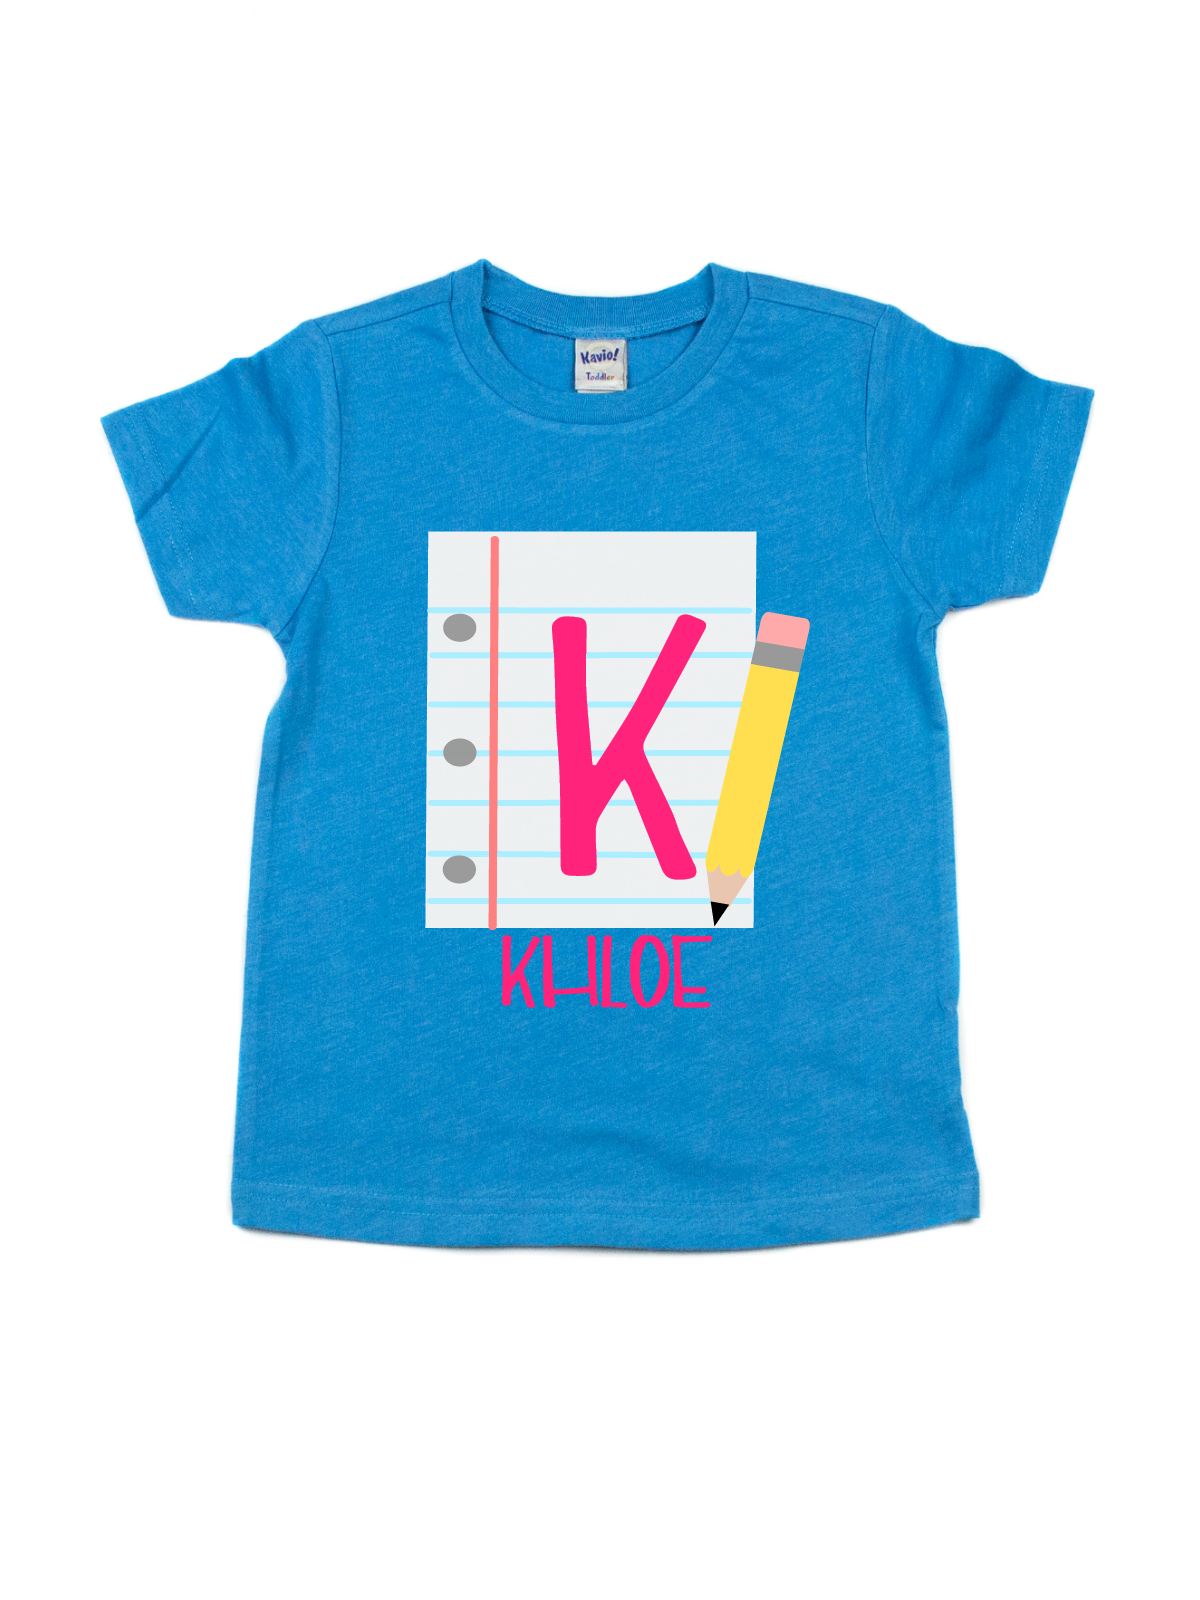 personalized kids back to school shirt